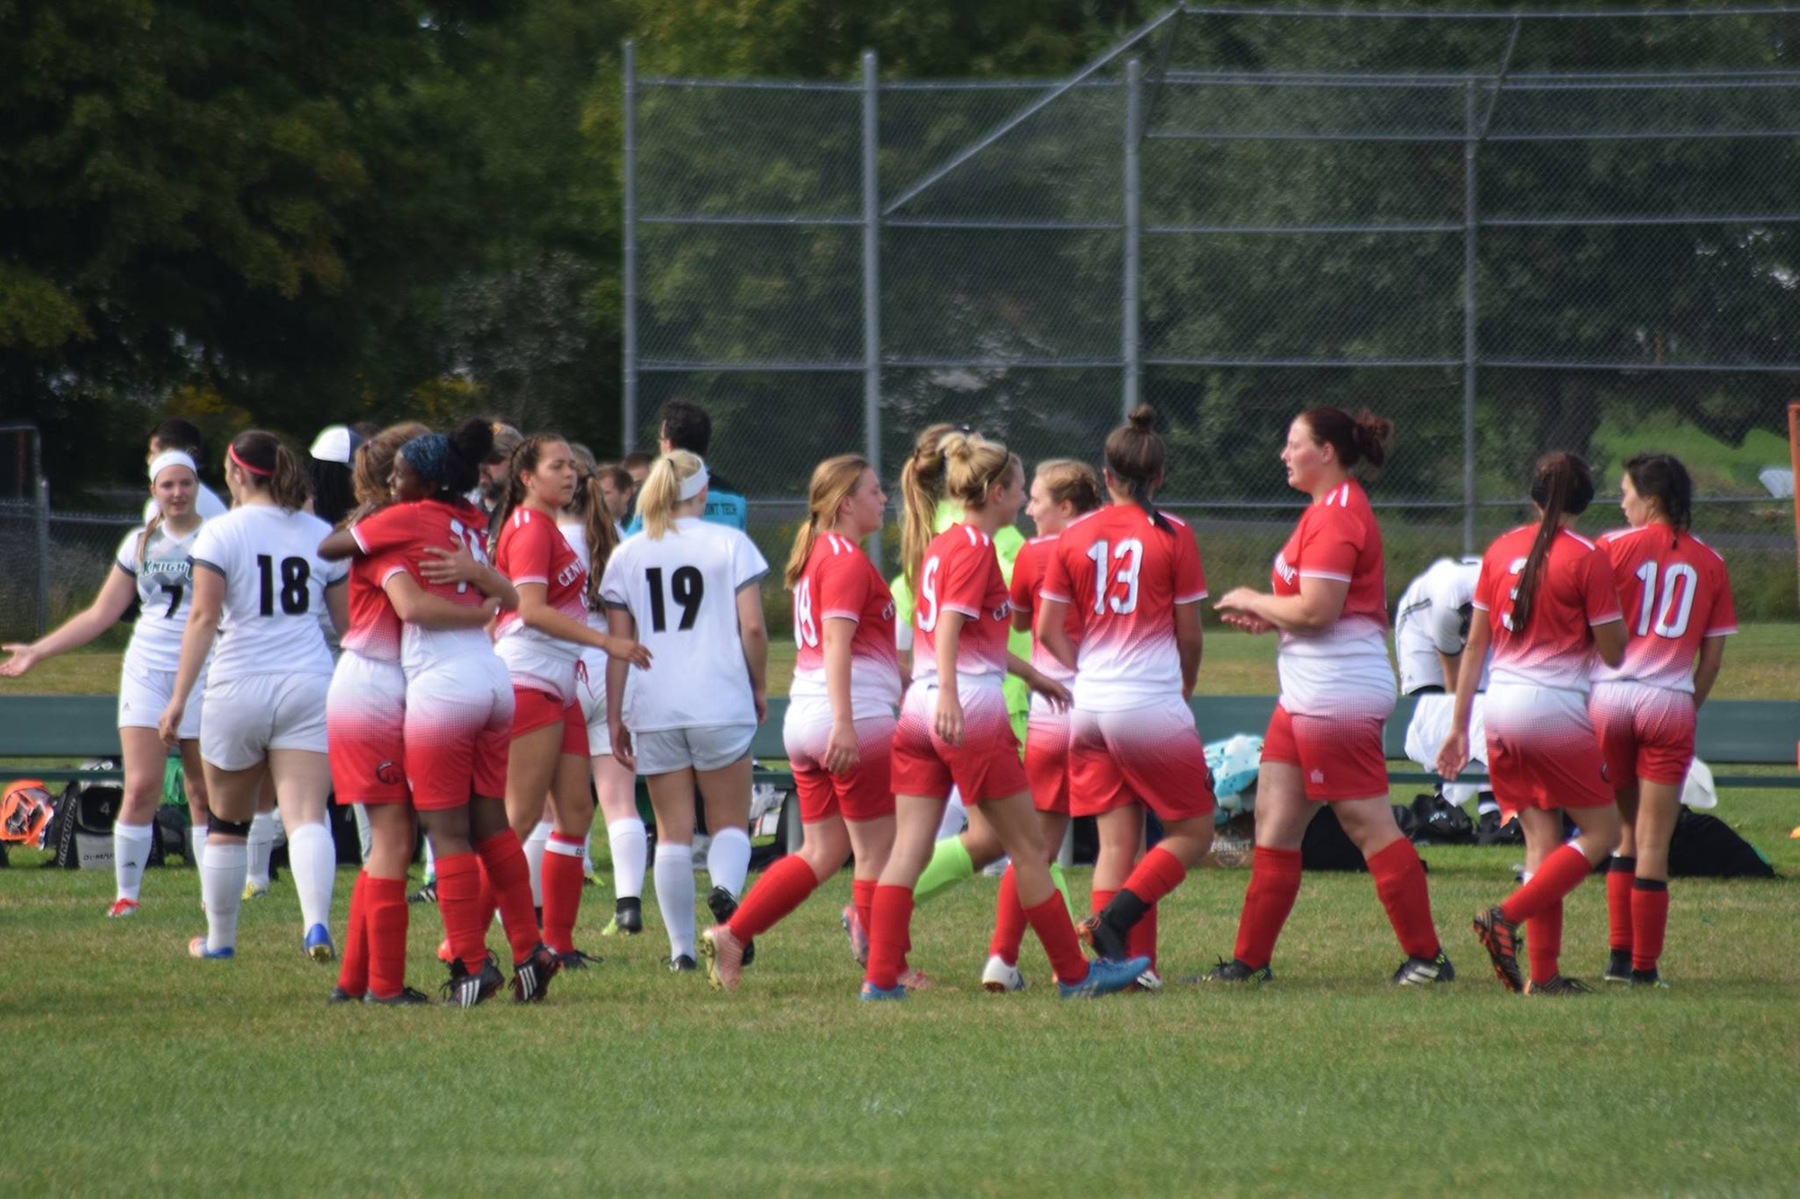 Women's Soccer celebrates after double-up VTC, 4-2.